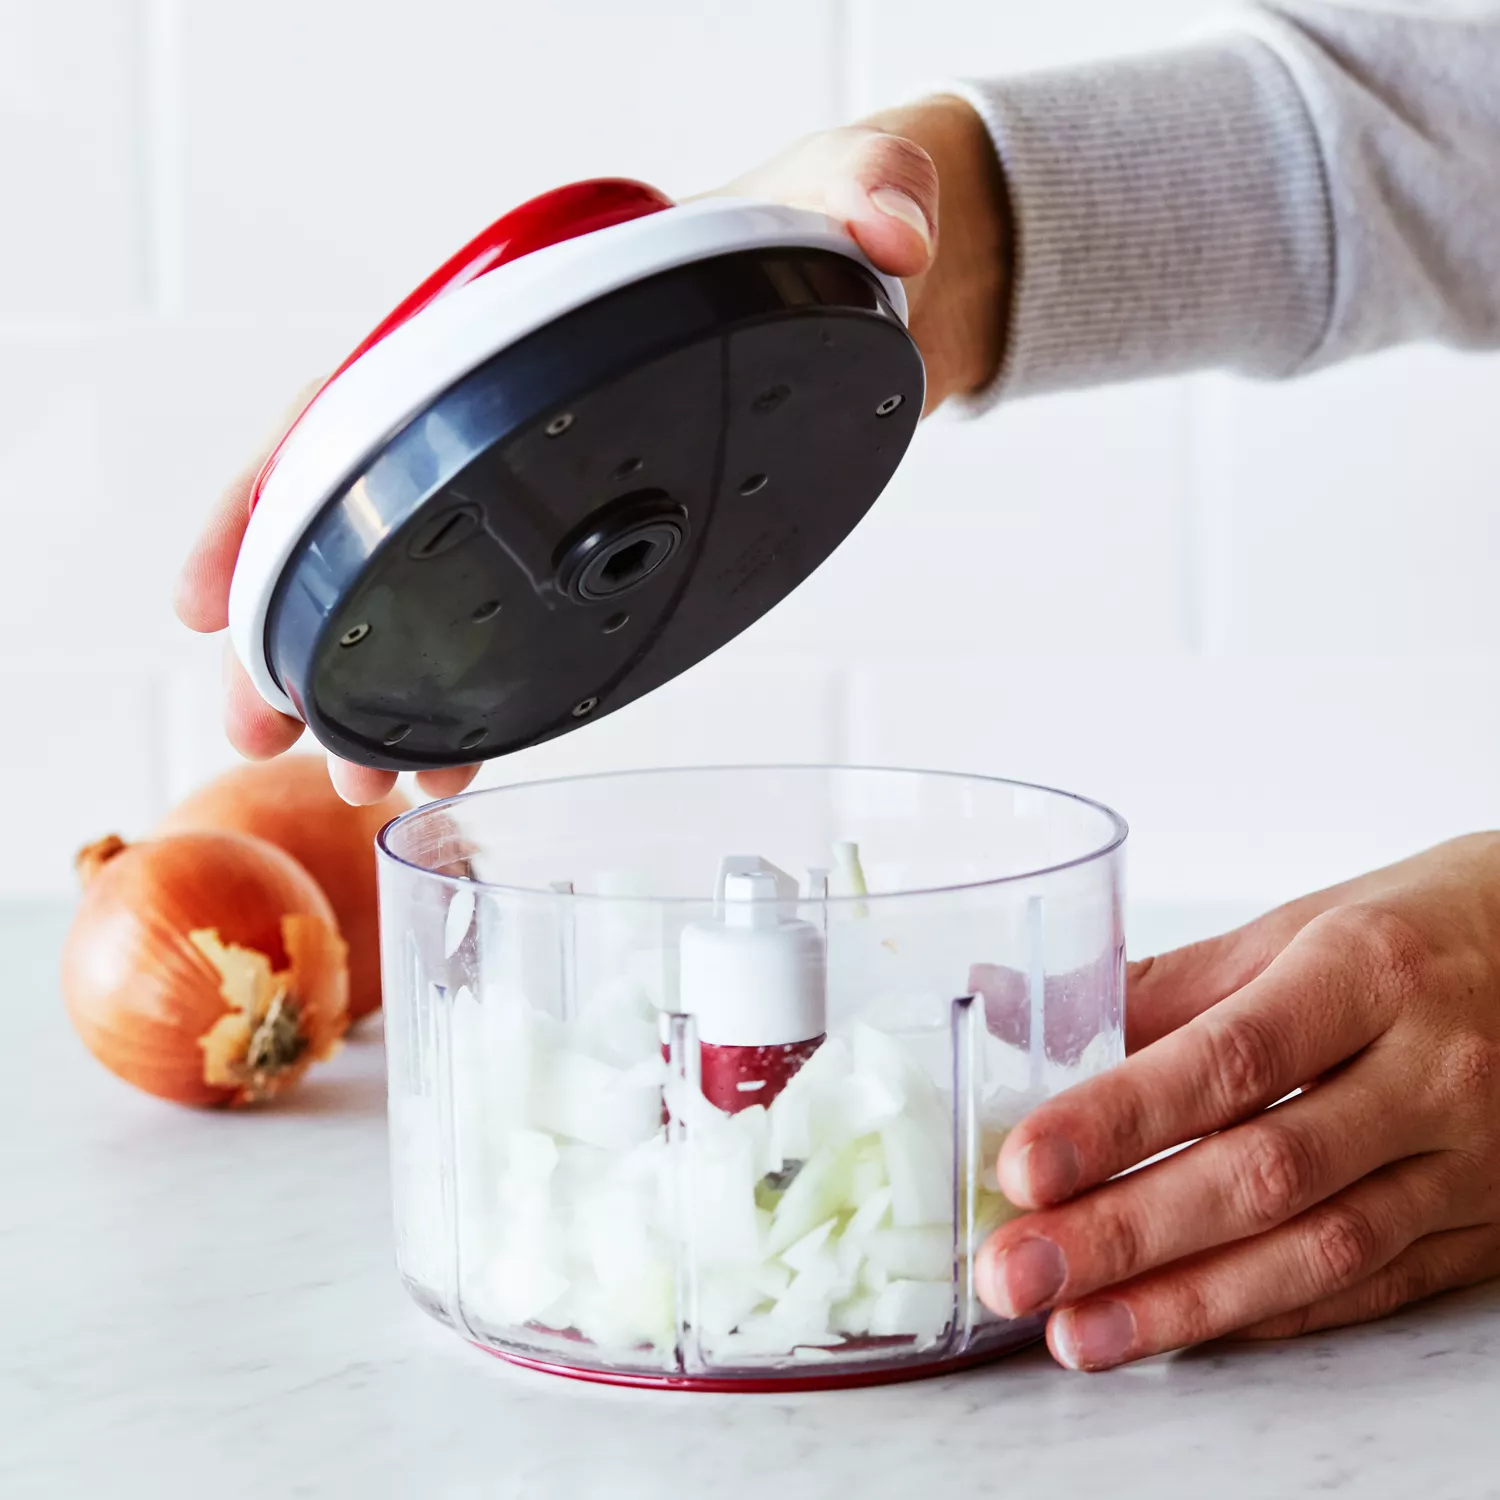 EASY PULL FOOD PROCESSOR– Shop in the Kitchen